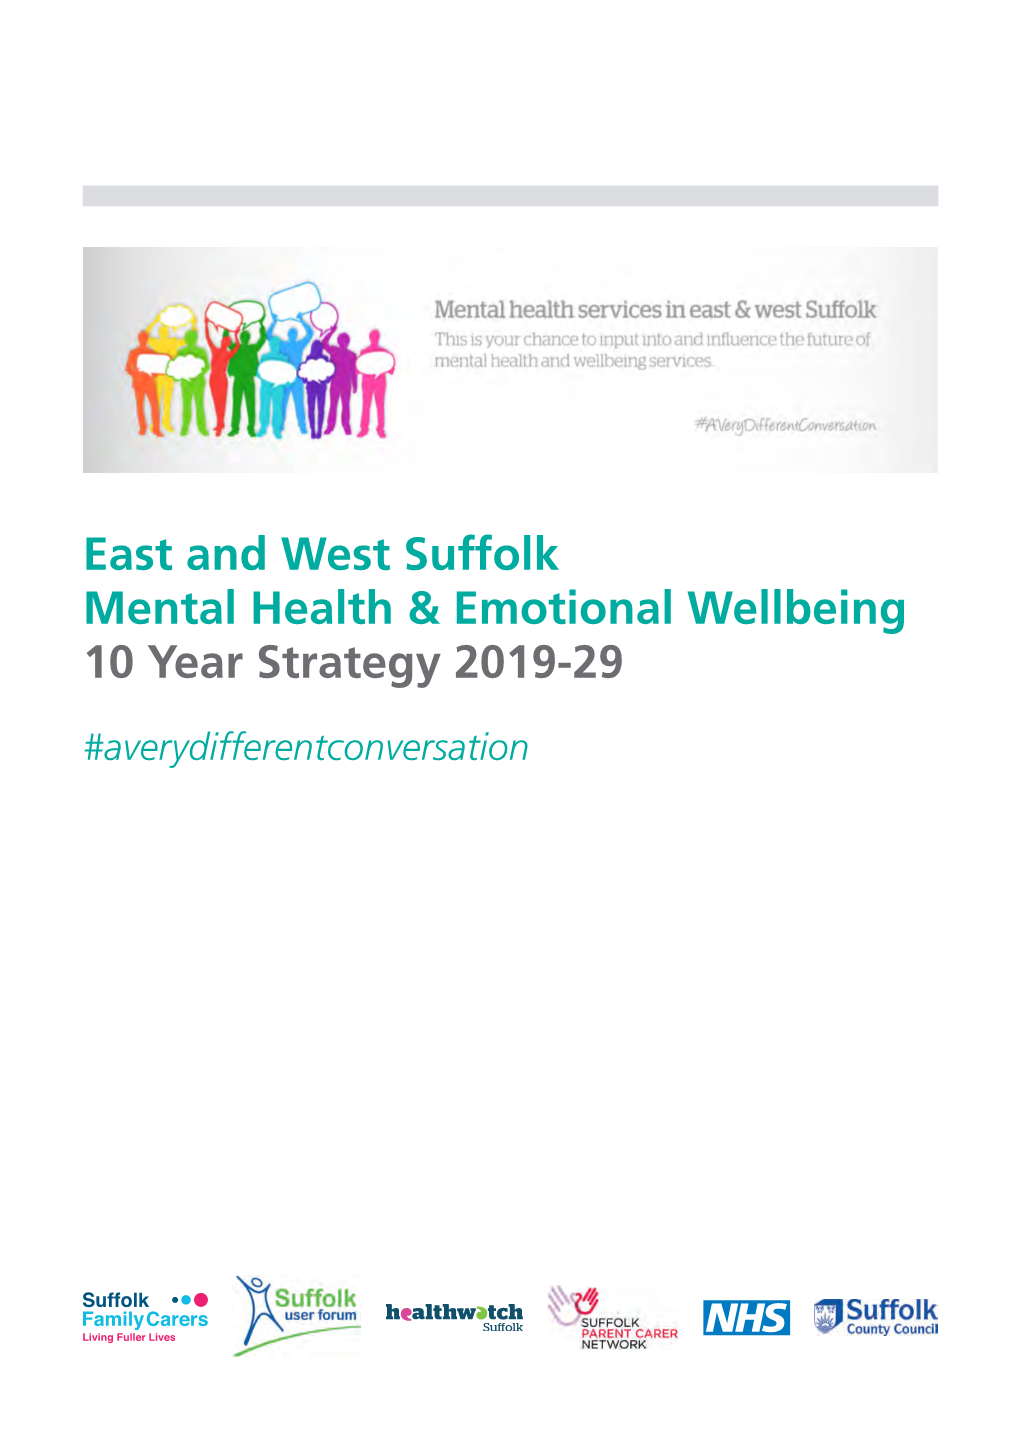 East and West Suffolk Mental Health & Emotional